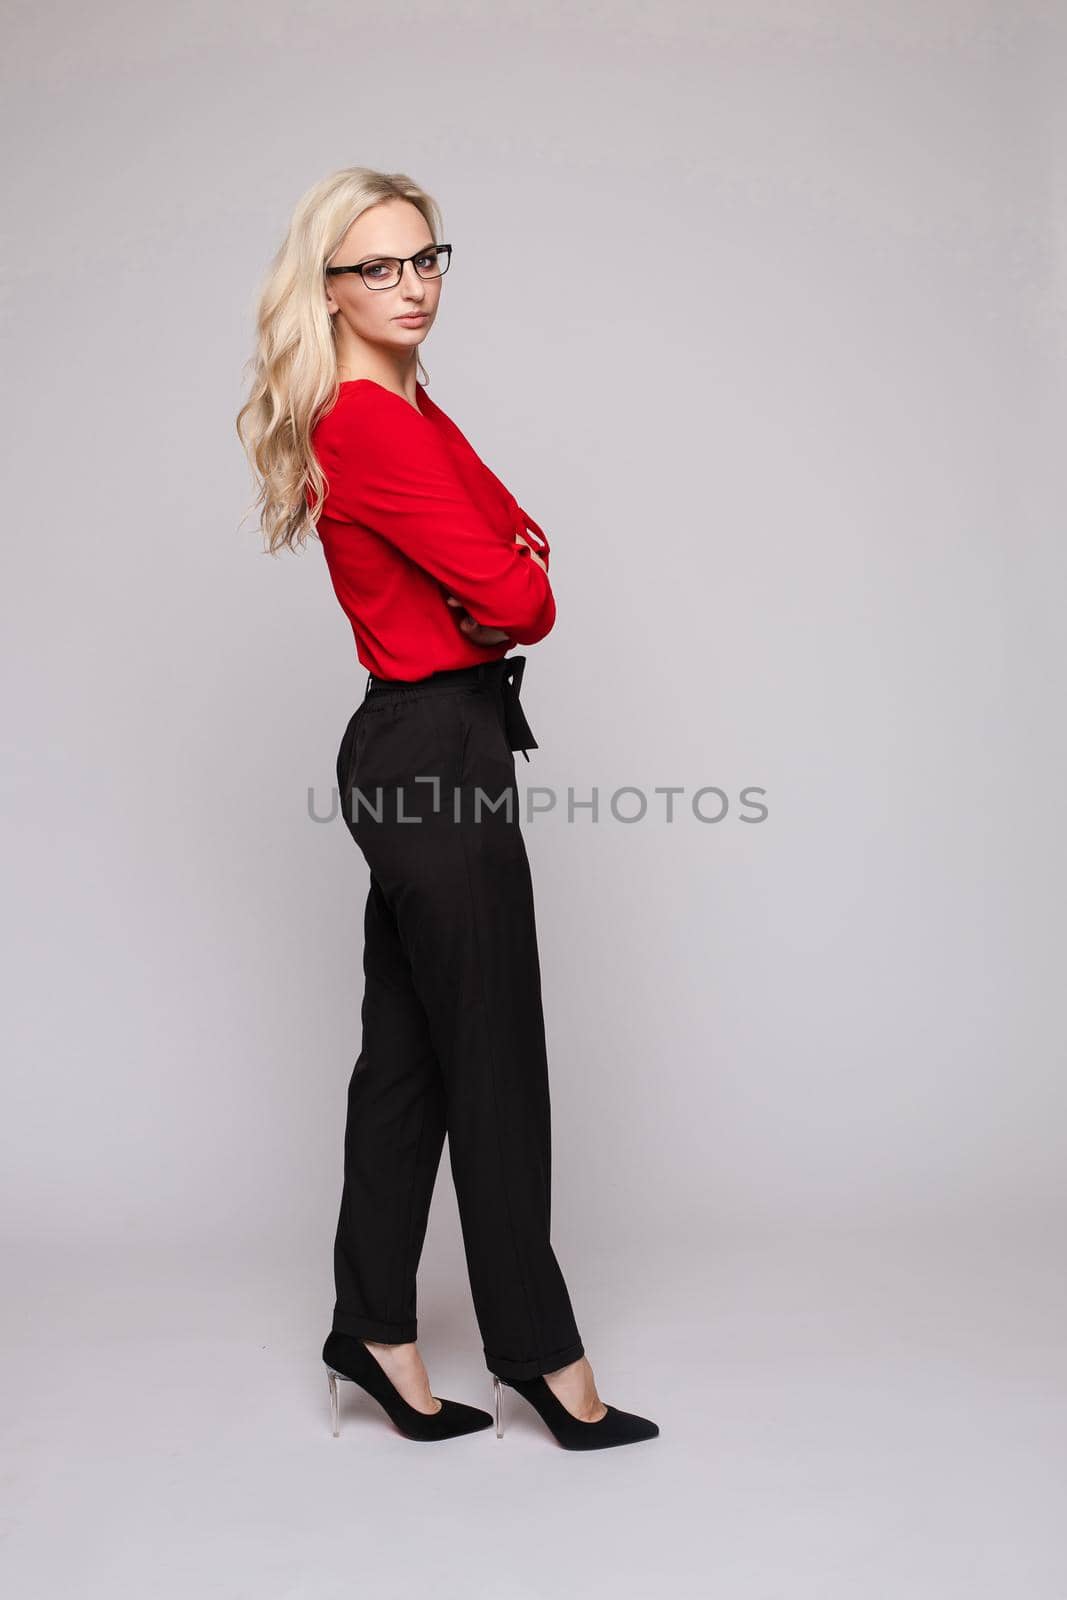 Successful female in smart outfit and glasses posing by StudioLucky